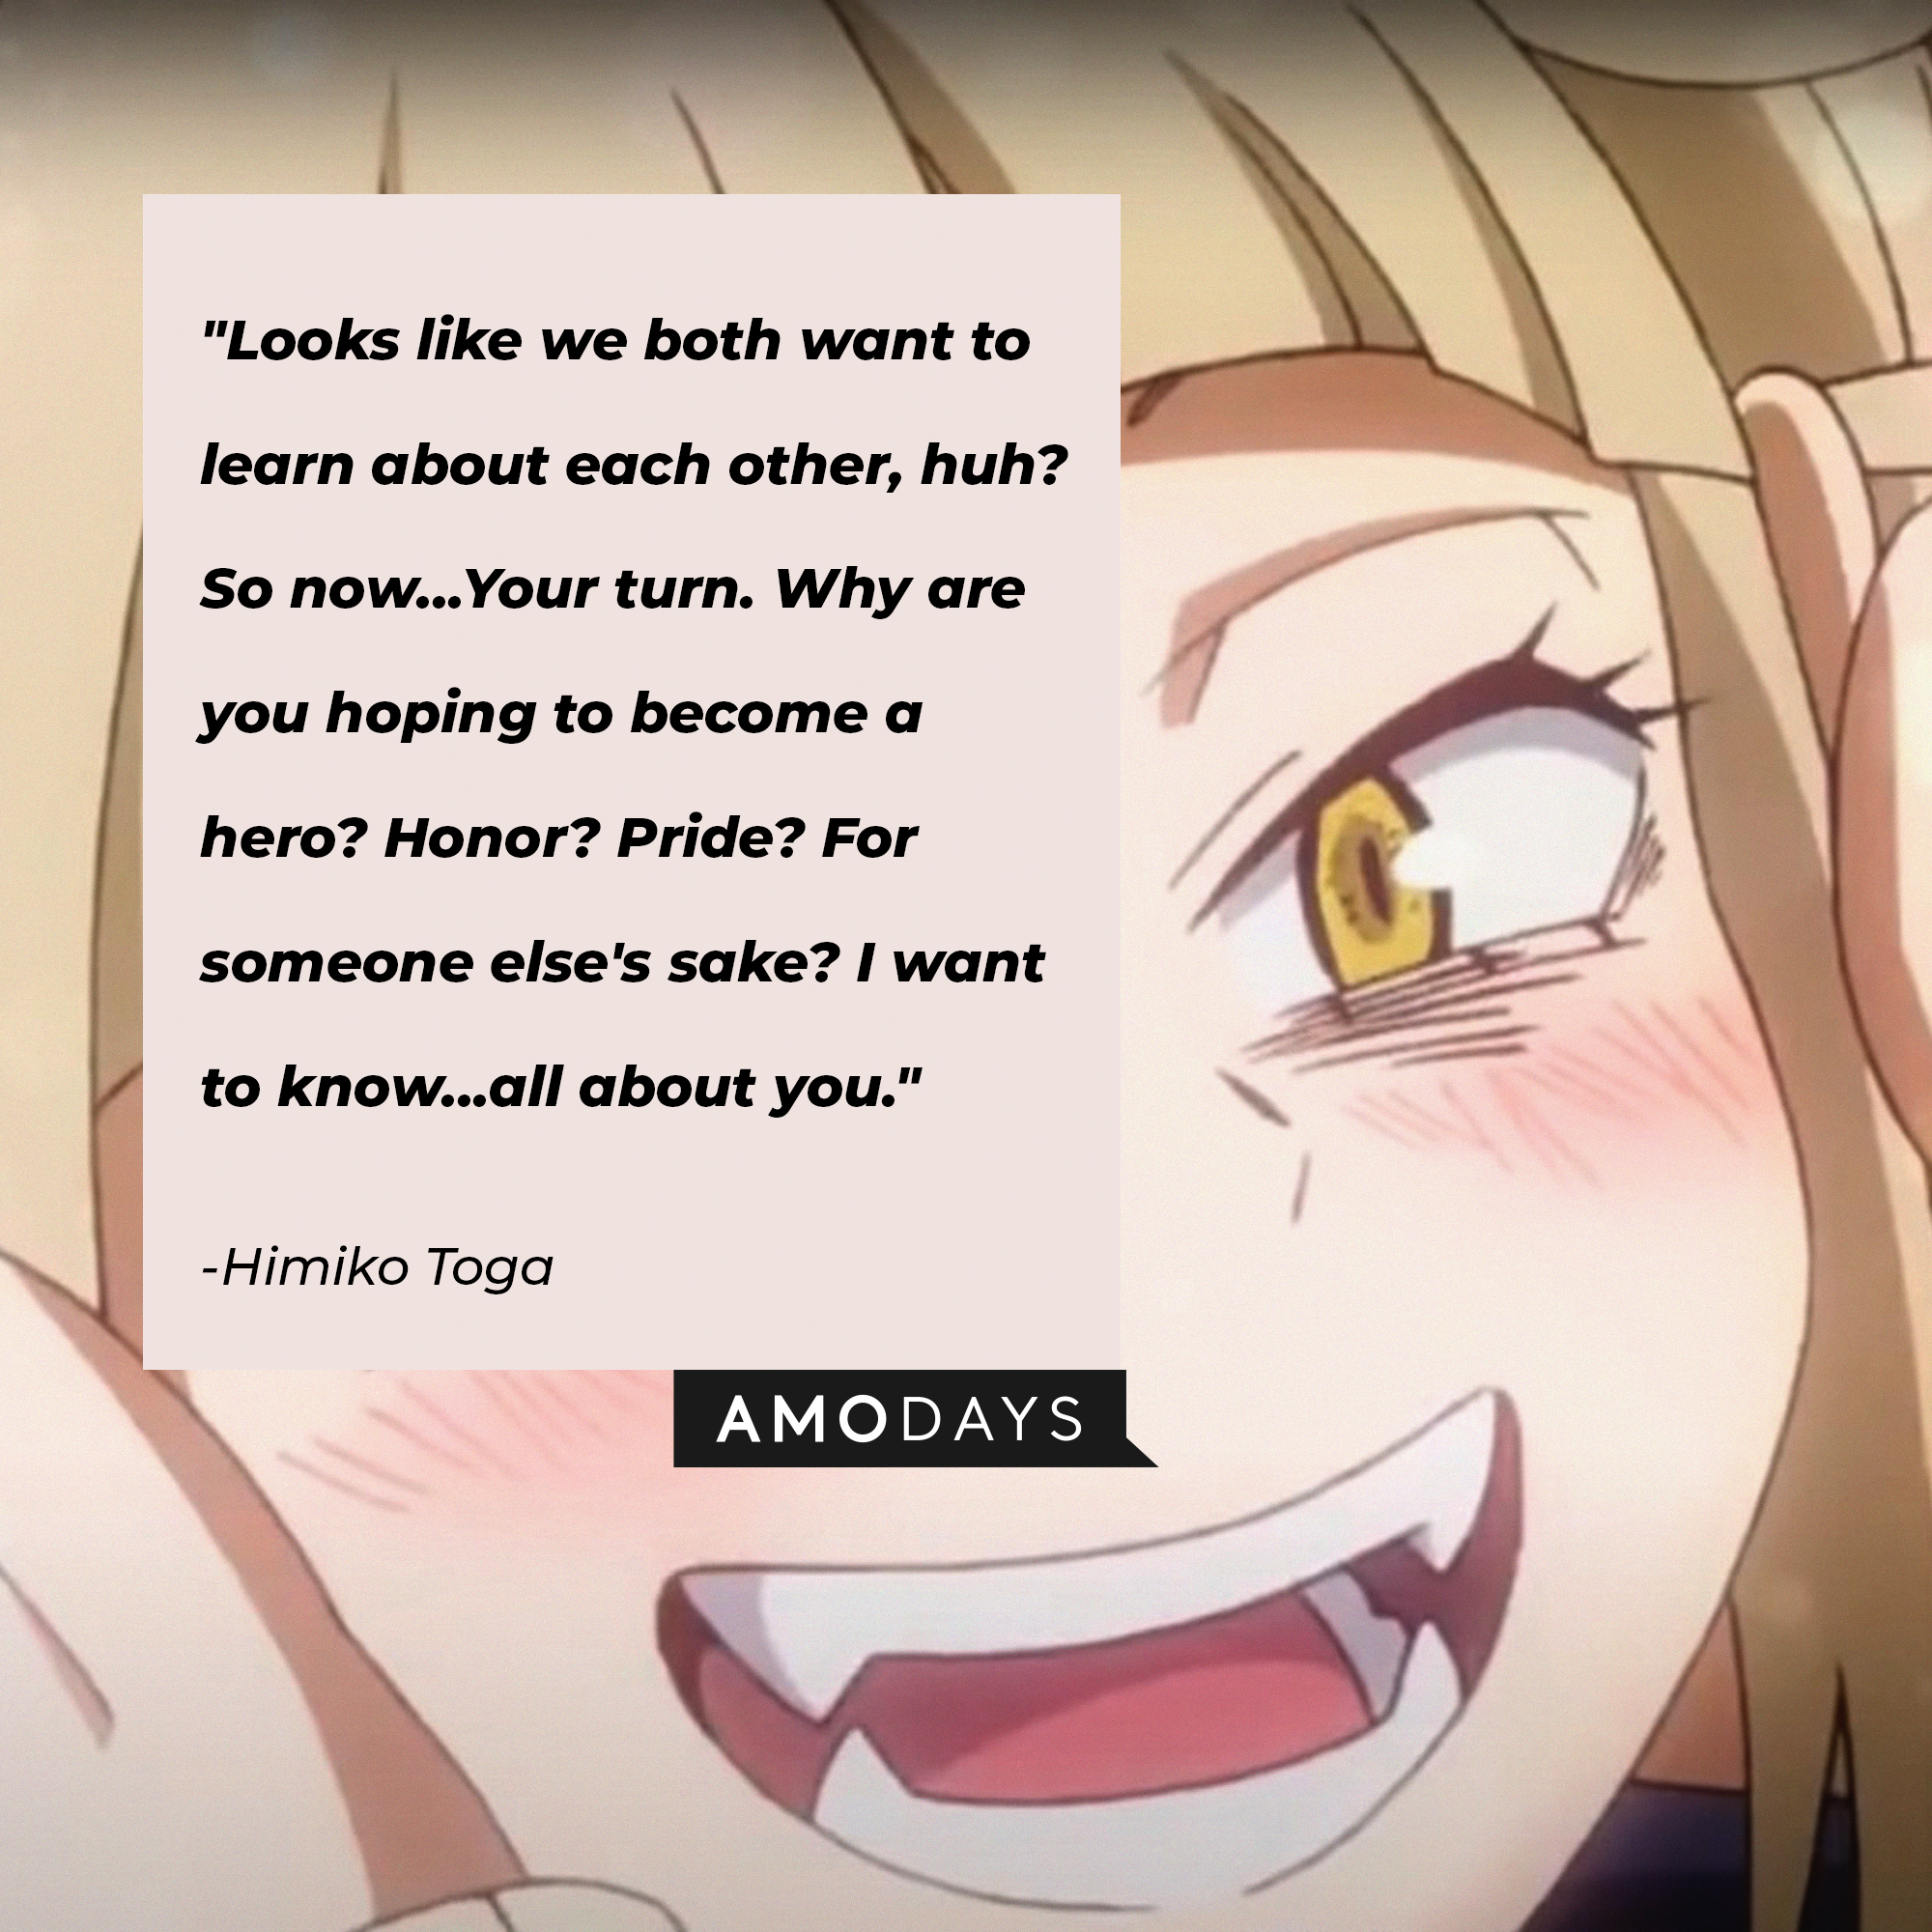 Himiko Toga’s quote: "Looks like we both want to learn about each other, huh? So now...Your turn. Why are you hoping to become a hero? Honor? Pride? For someone else's sake? I want to know...all about you." | Image: AmoDays